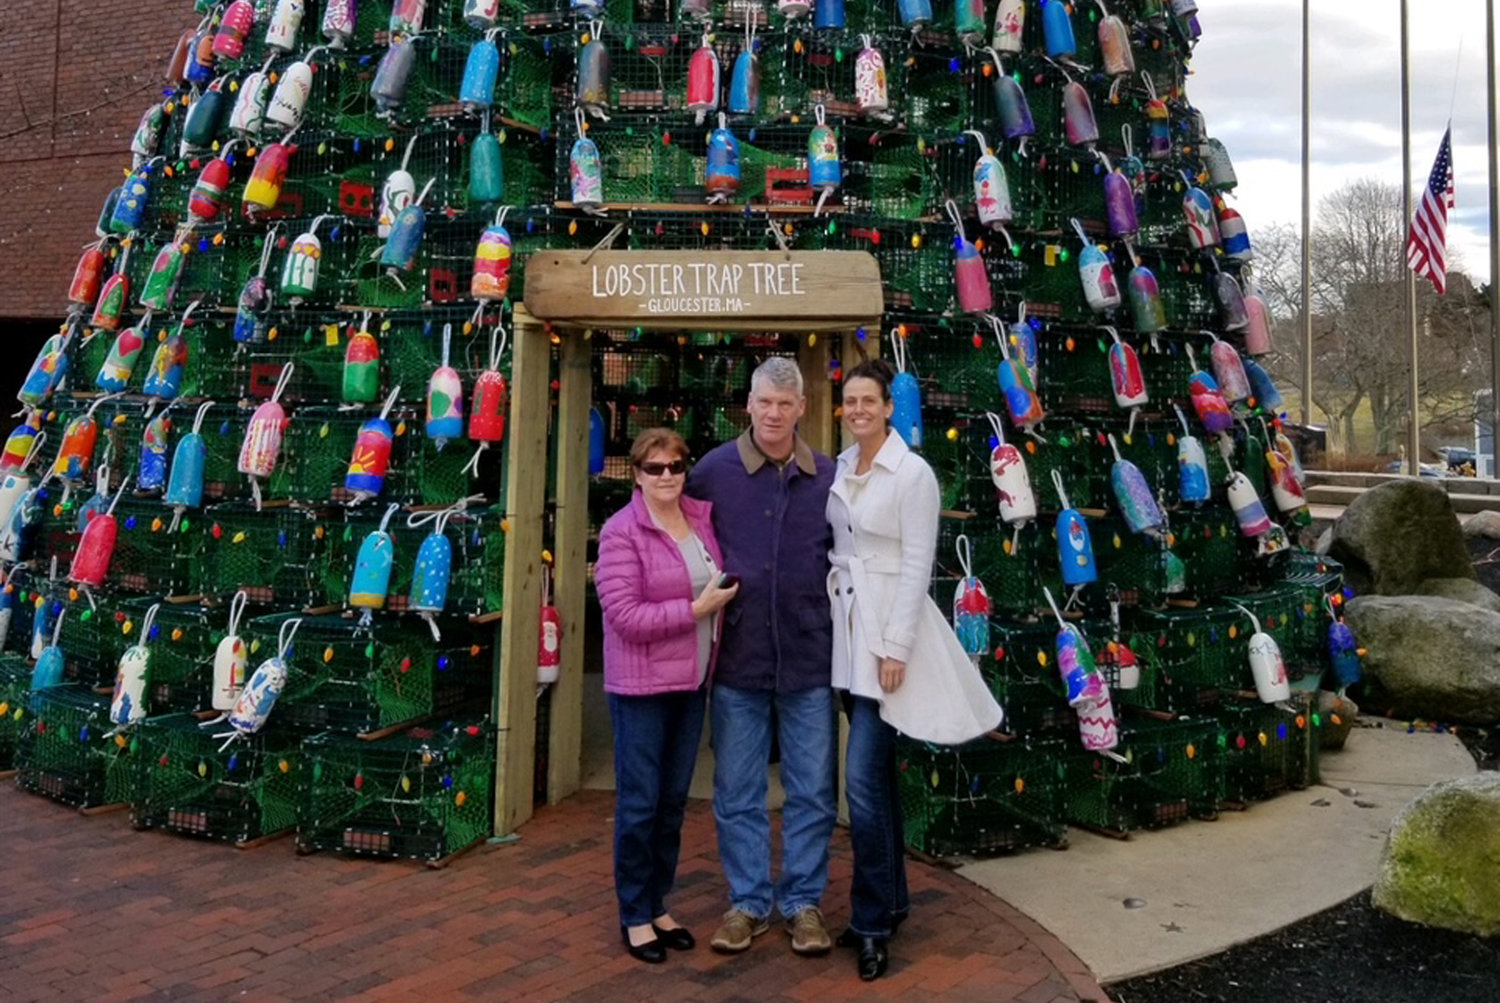 Doris Copponi, Tom Fabian, and Lisa Konicki find inspiration in Gloucester. “Their tree is covered entirely in buoys painted by children; ours has buoys from professional artists and 40 painted by Stonington children. The OCCC sent a $1,000 donation check to Cape Ann Arts which produced this tree as a ‘thank you’ for the inspiration,” says Konicki.